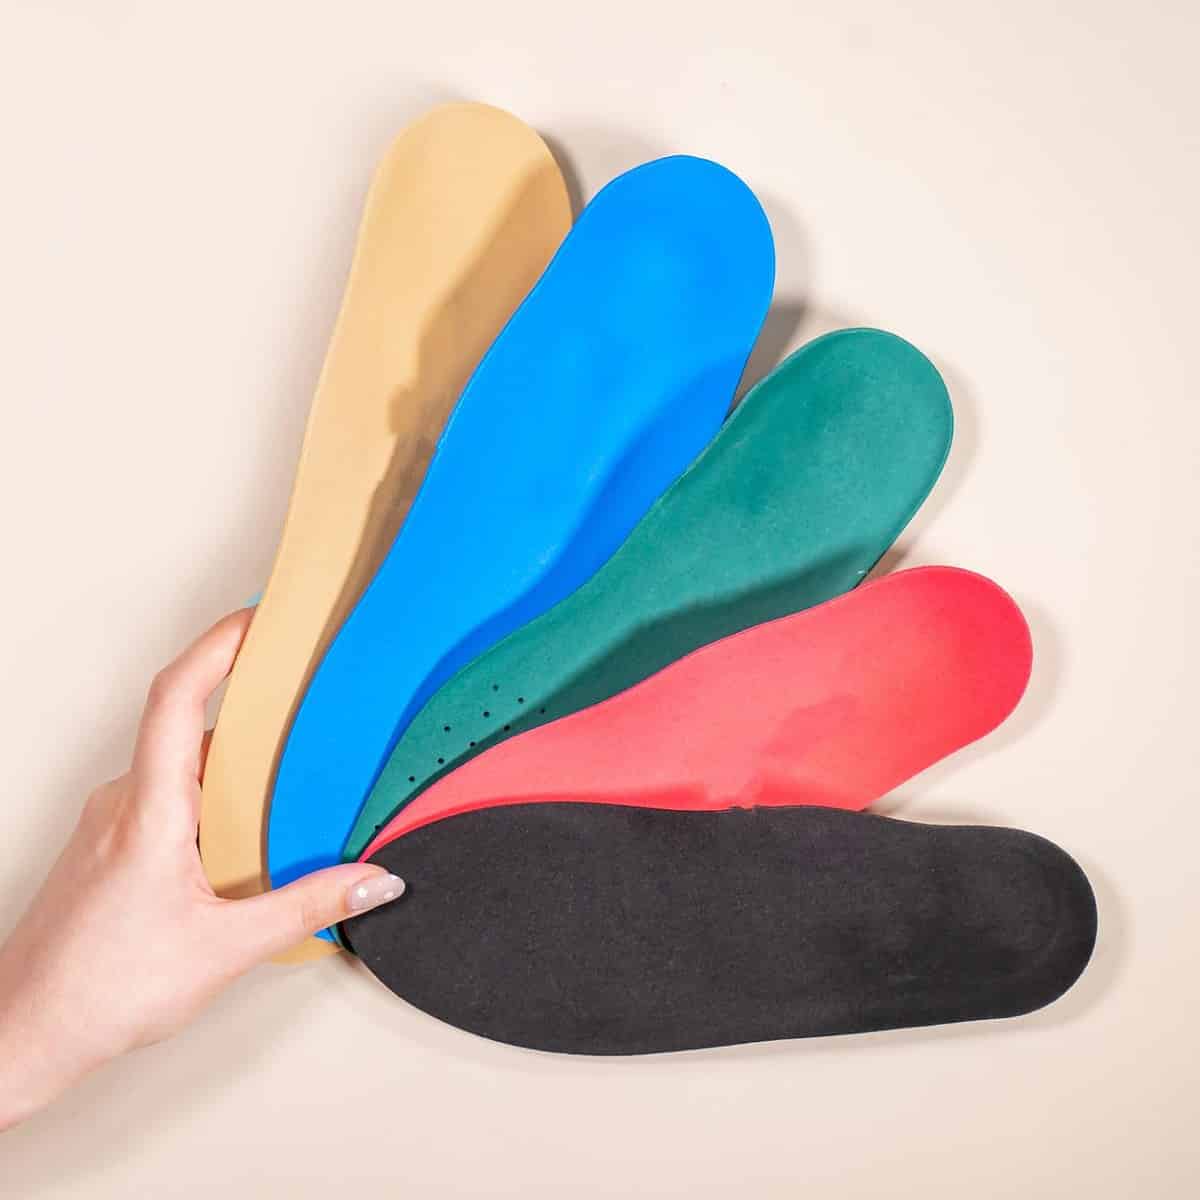 Various foot orthotics being held in front of a cream background